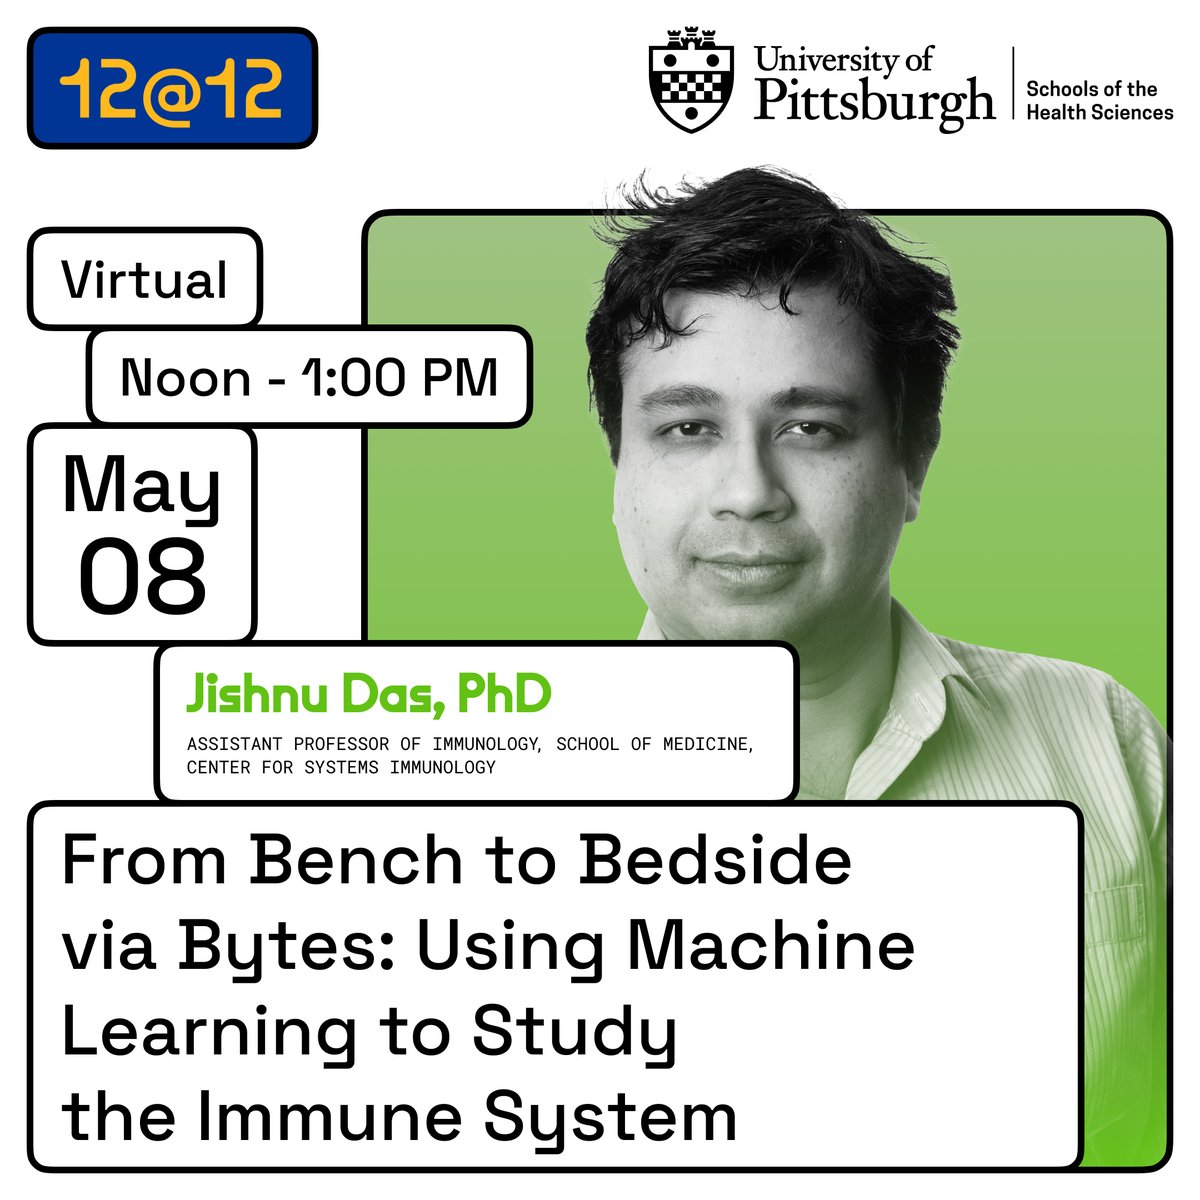 Discover machine learning techniques for studying the immune system that identify actual biological mechanisms (not just associations) this Friday with Assistant Professor of Immunology Jishnu Das. Find more info and register for your spot at bit.ly/4bii6Fw.